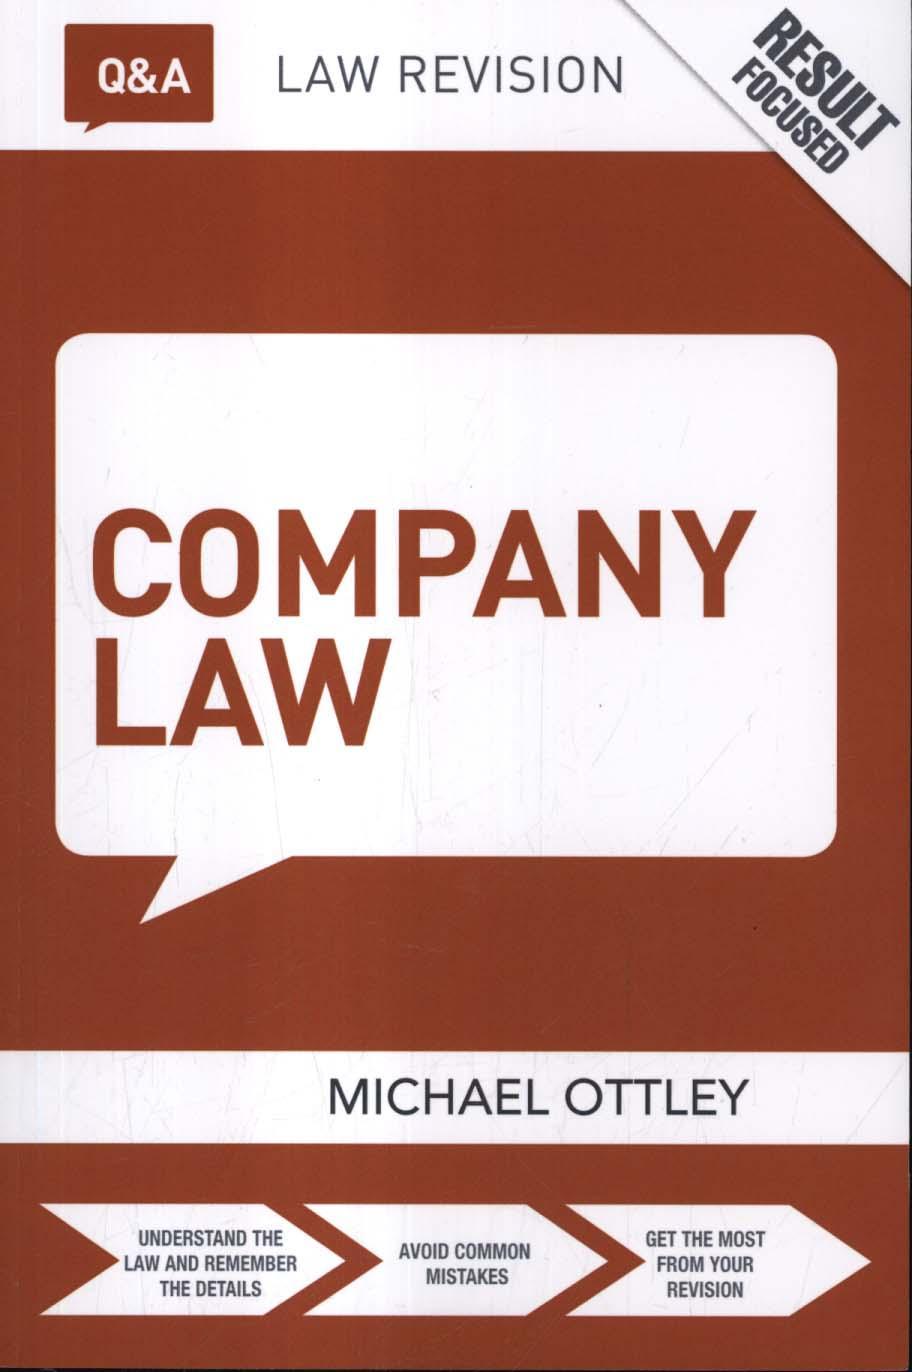 Q&A Company Law - Mike Ottley